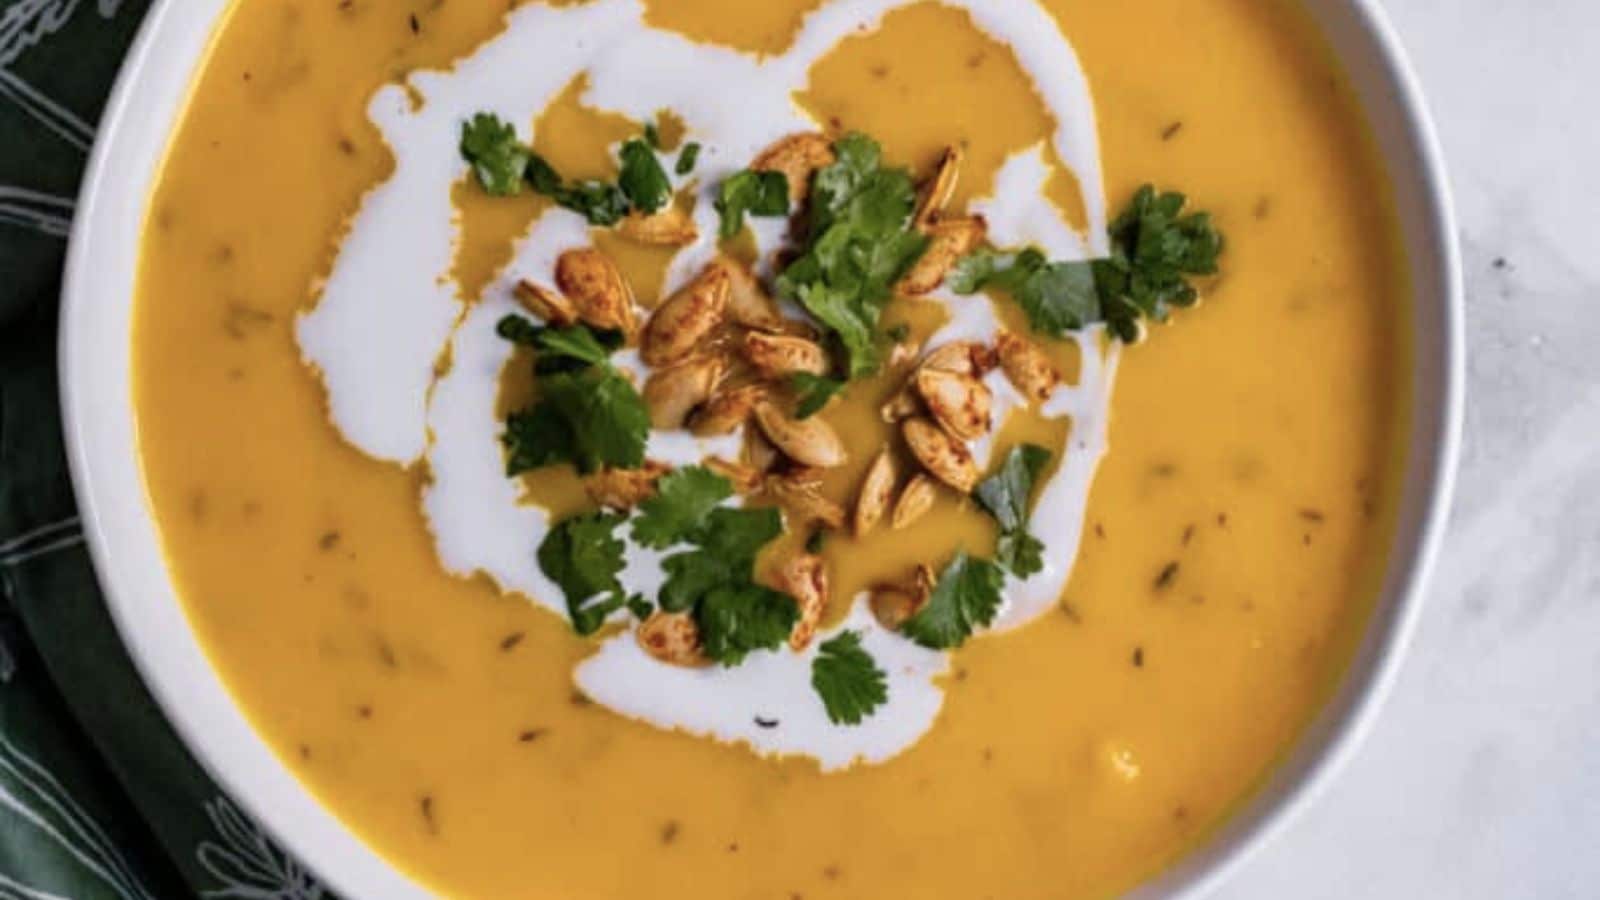 Butternut squash and carrot ginger soup.
